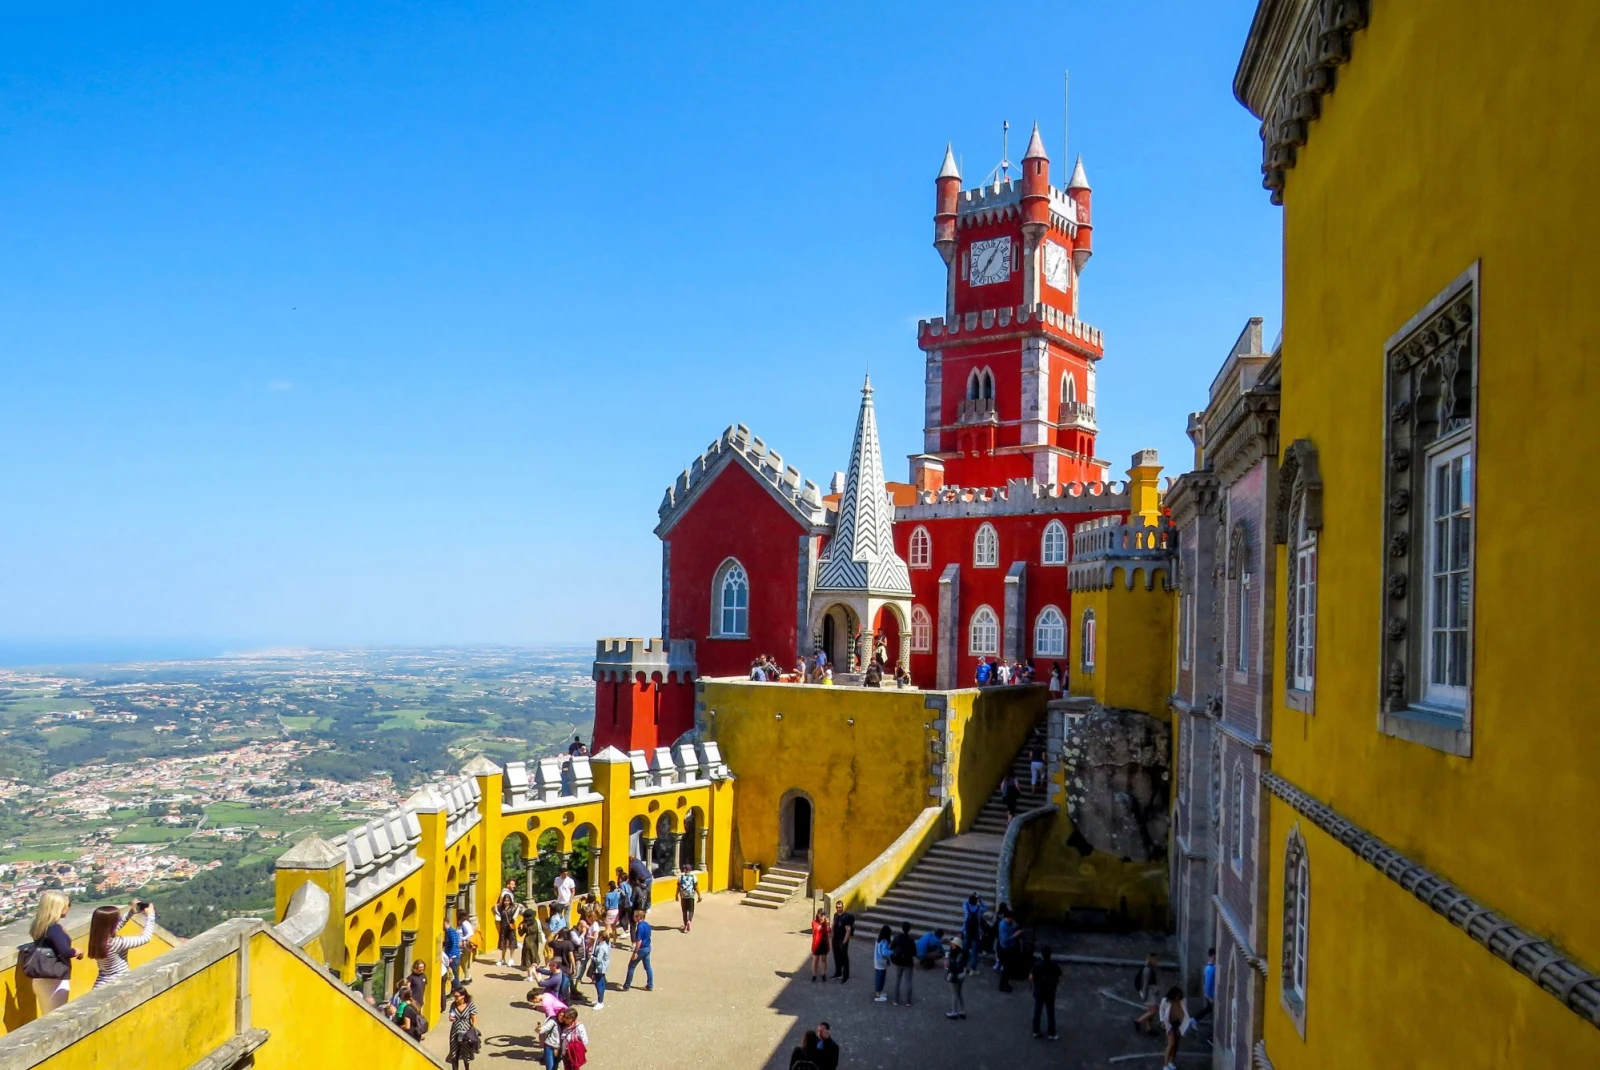 people walk around a yellow and orange castle atop a city on a clear blue day